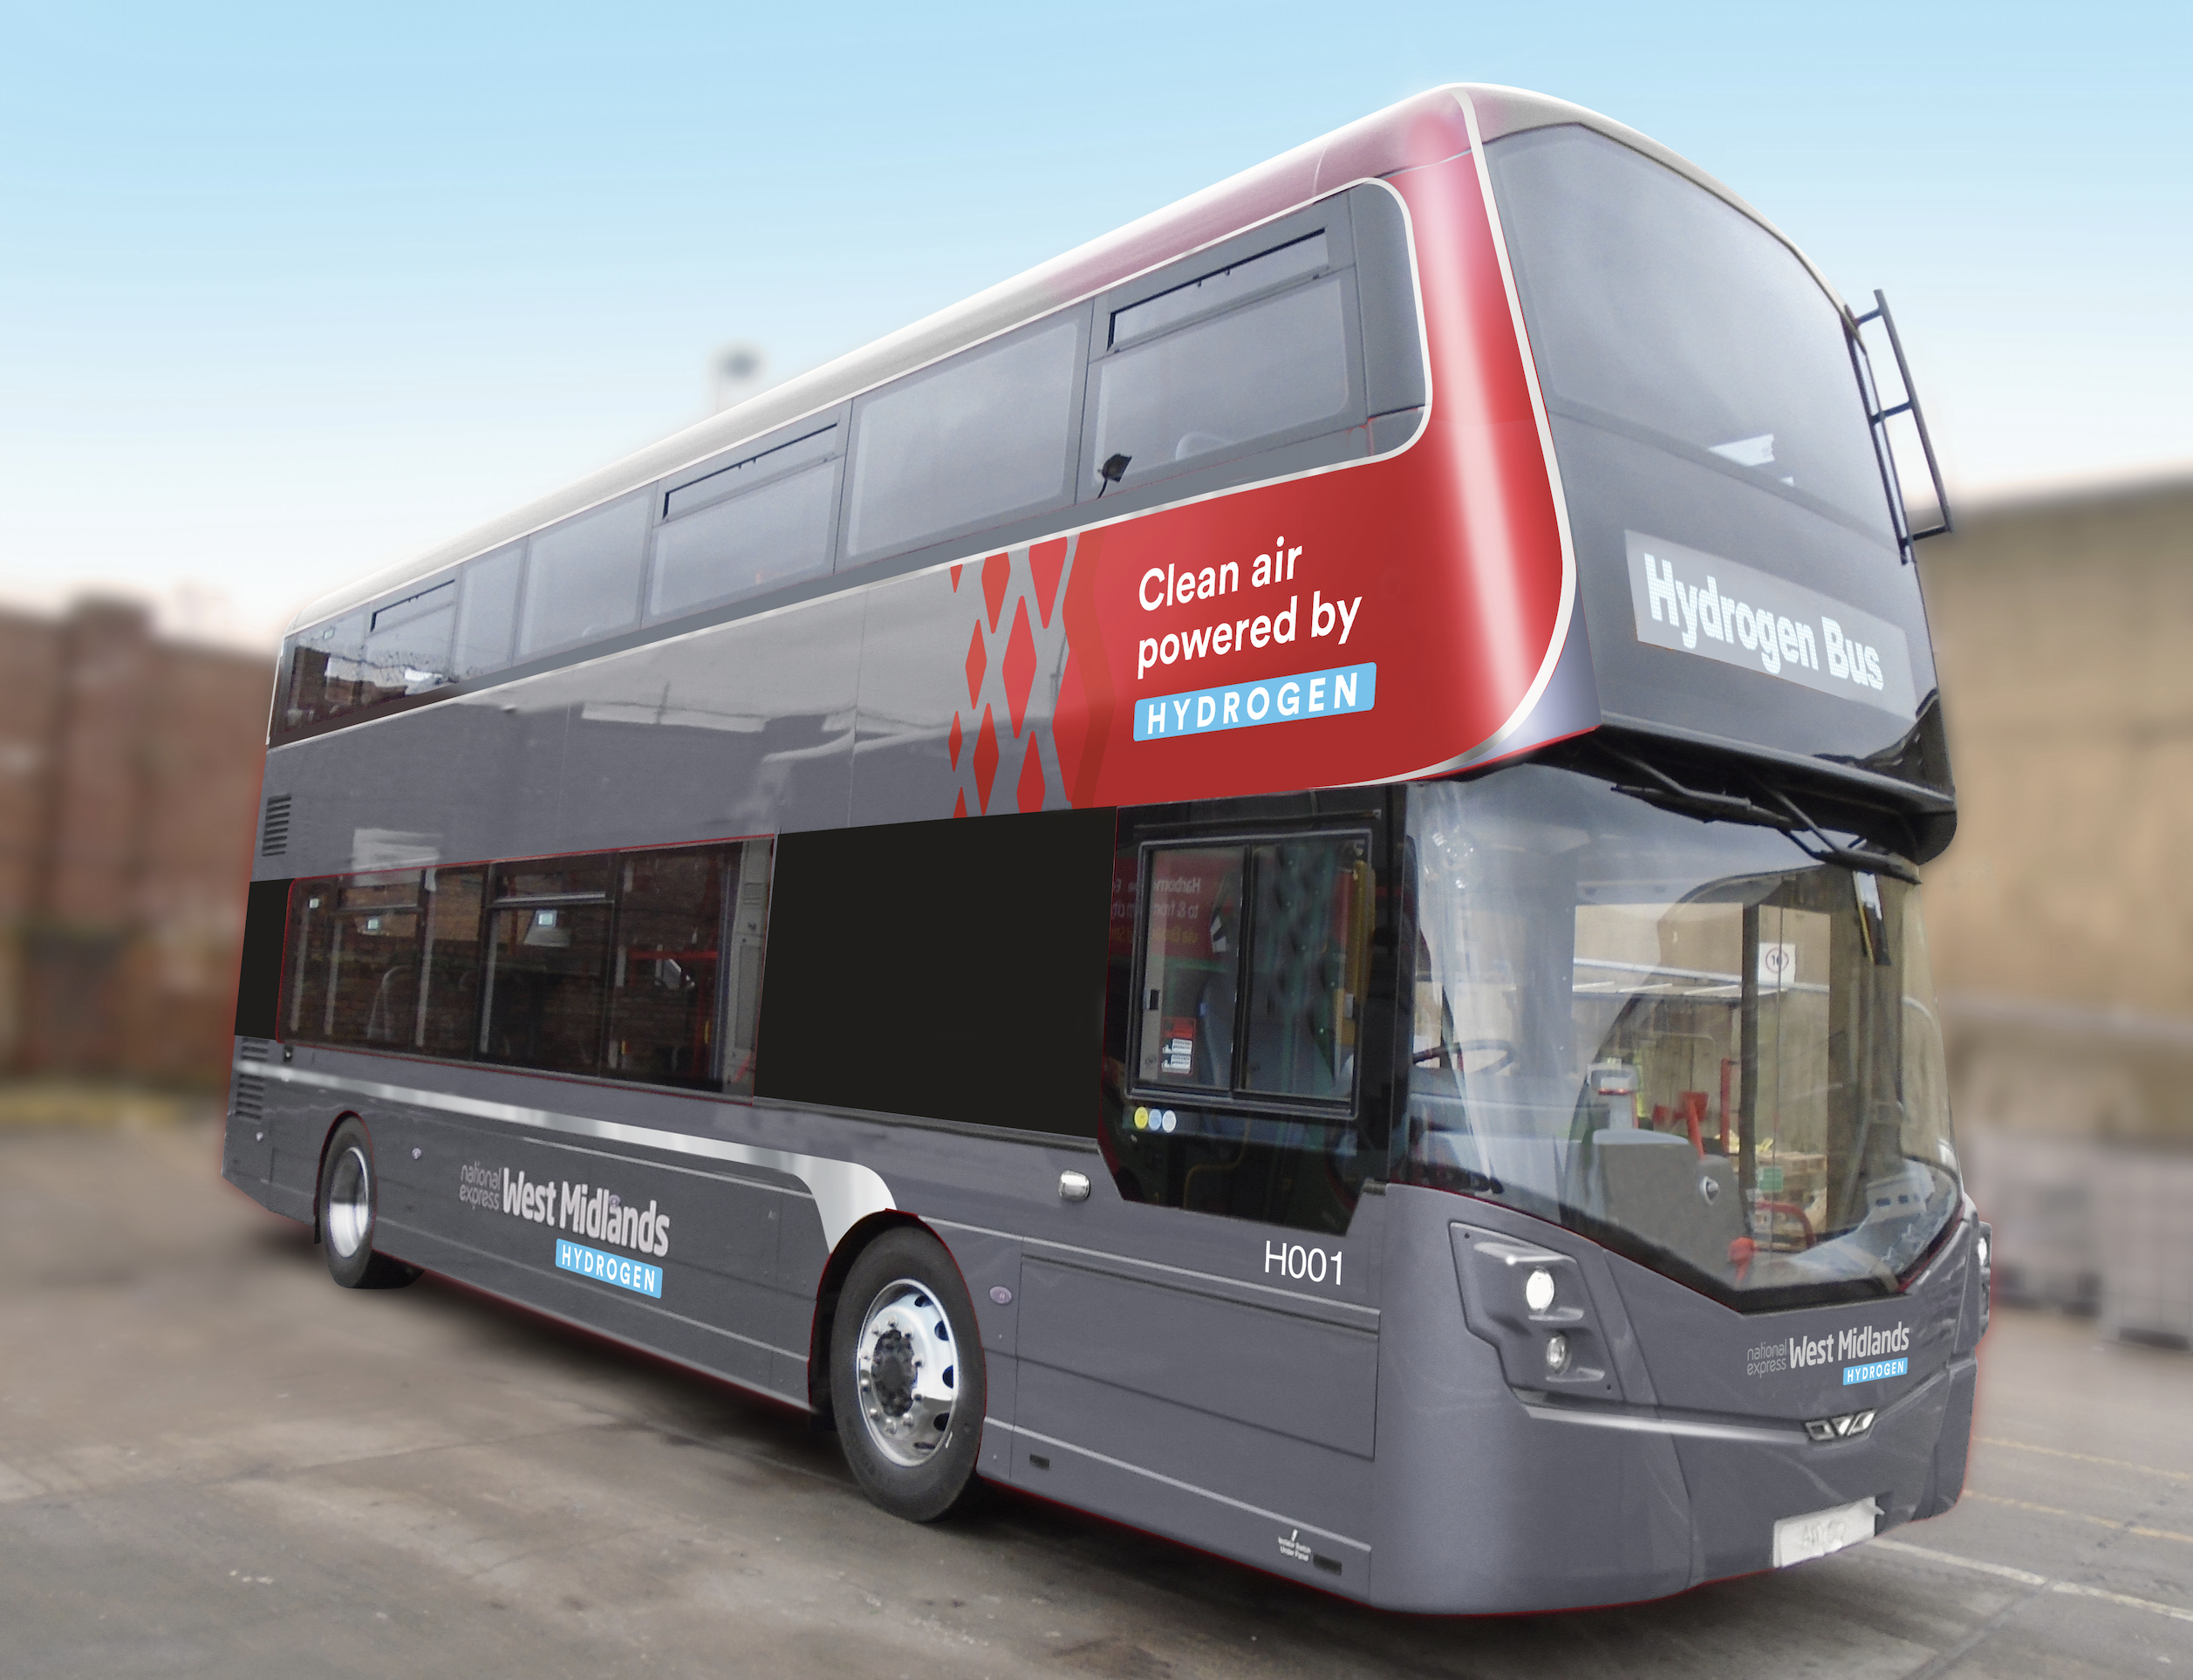 Hydrogen buses are coming to Birmingham